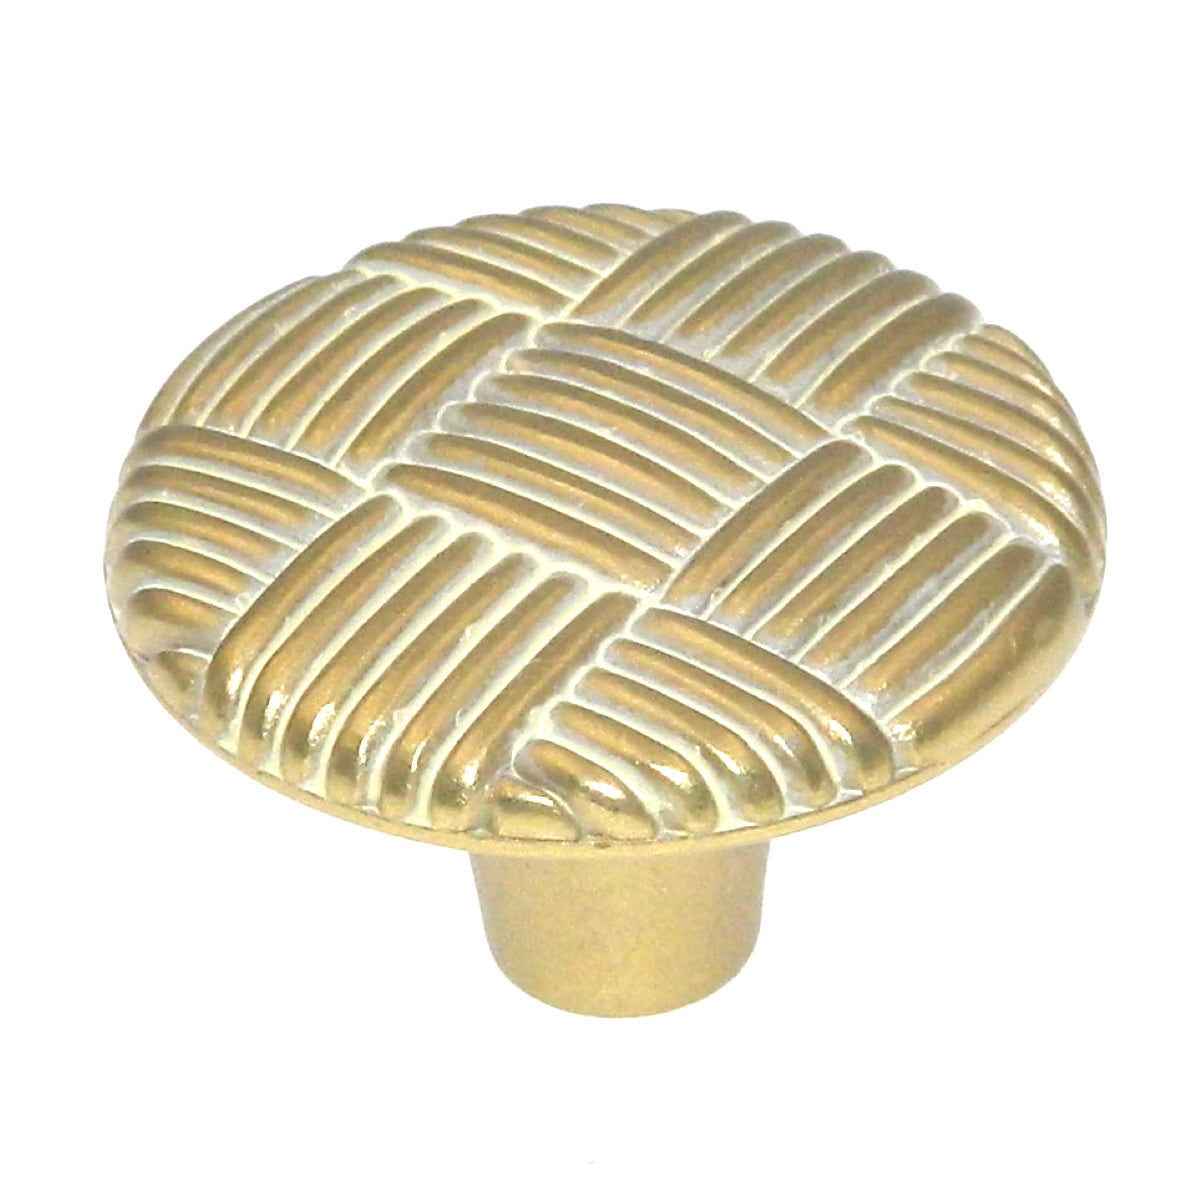 10 Pack Hickory Tapestry PA1412-GB Golden Blonde 1 1/4" Cabinet Knob Pull